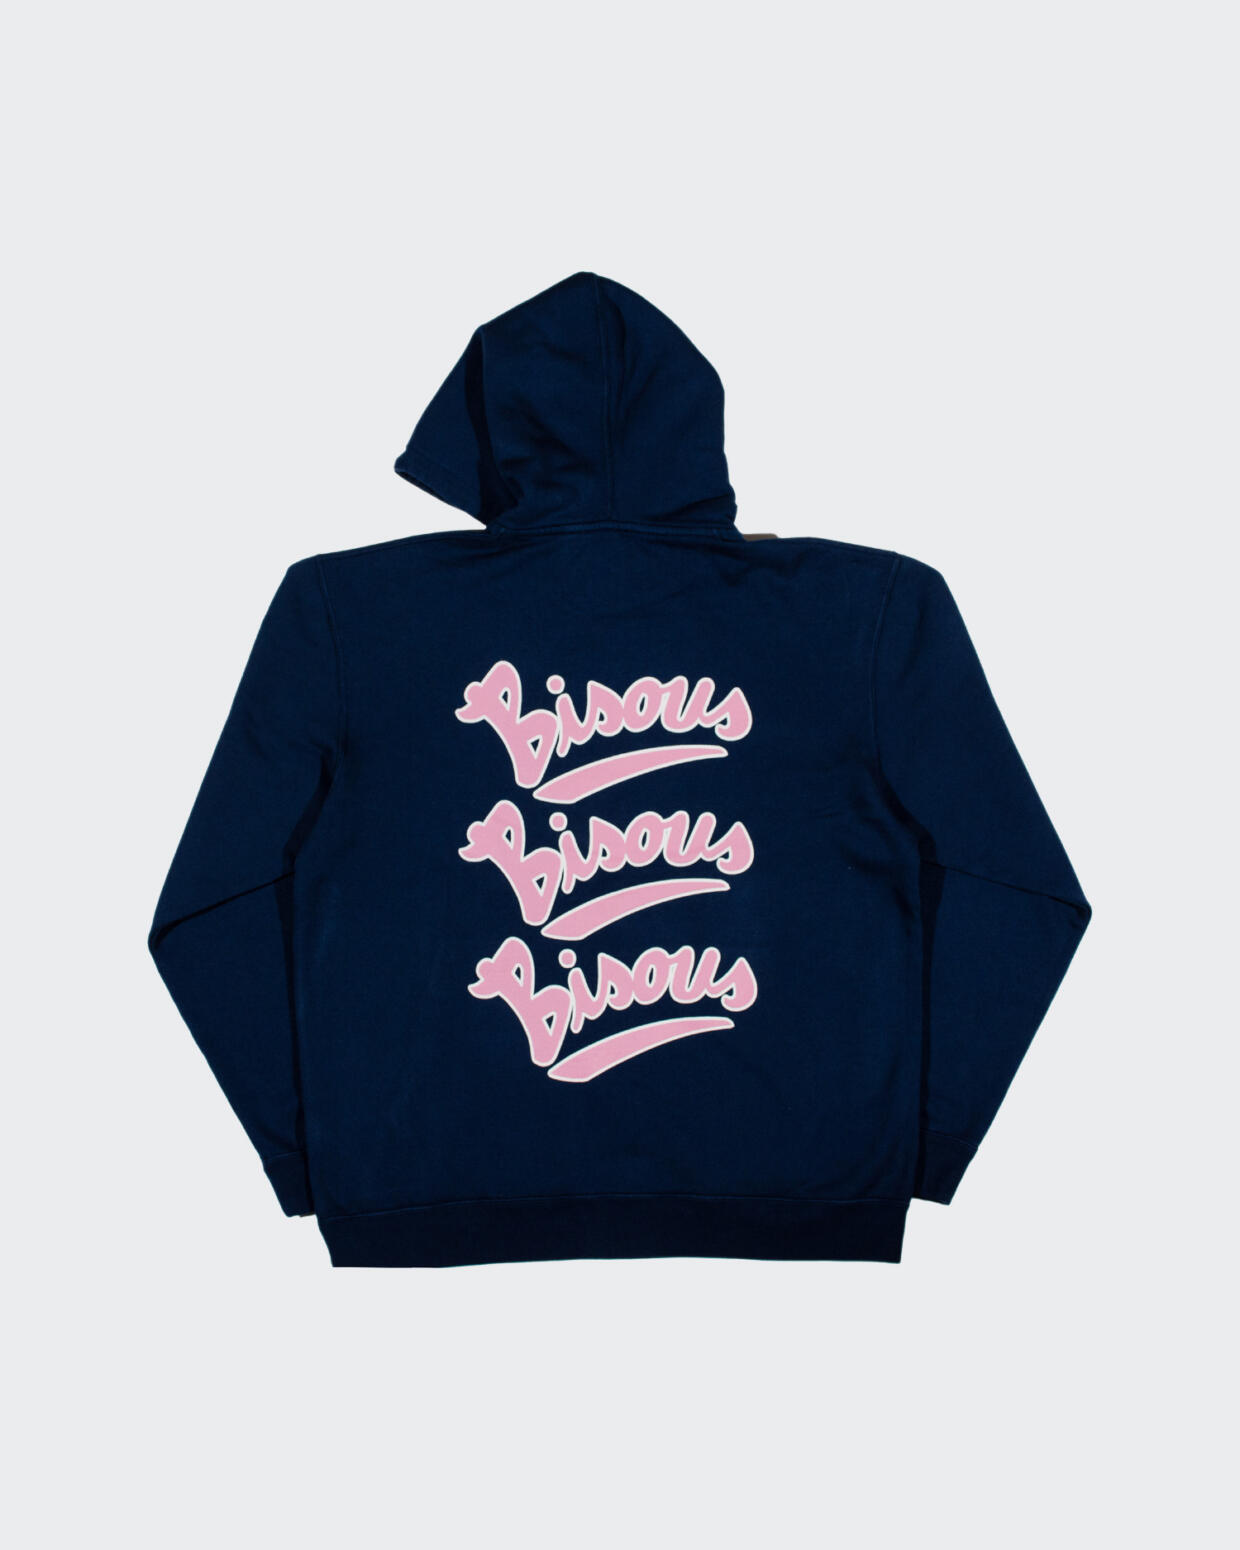 Bisous Bisous Gianni Hoody